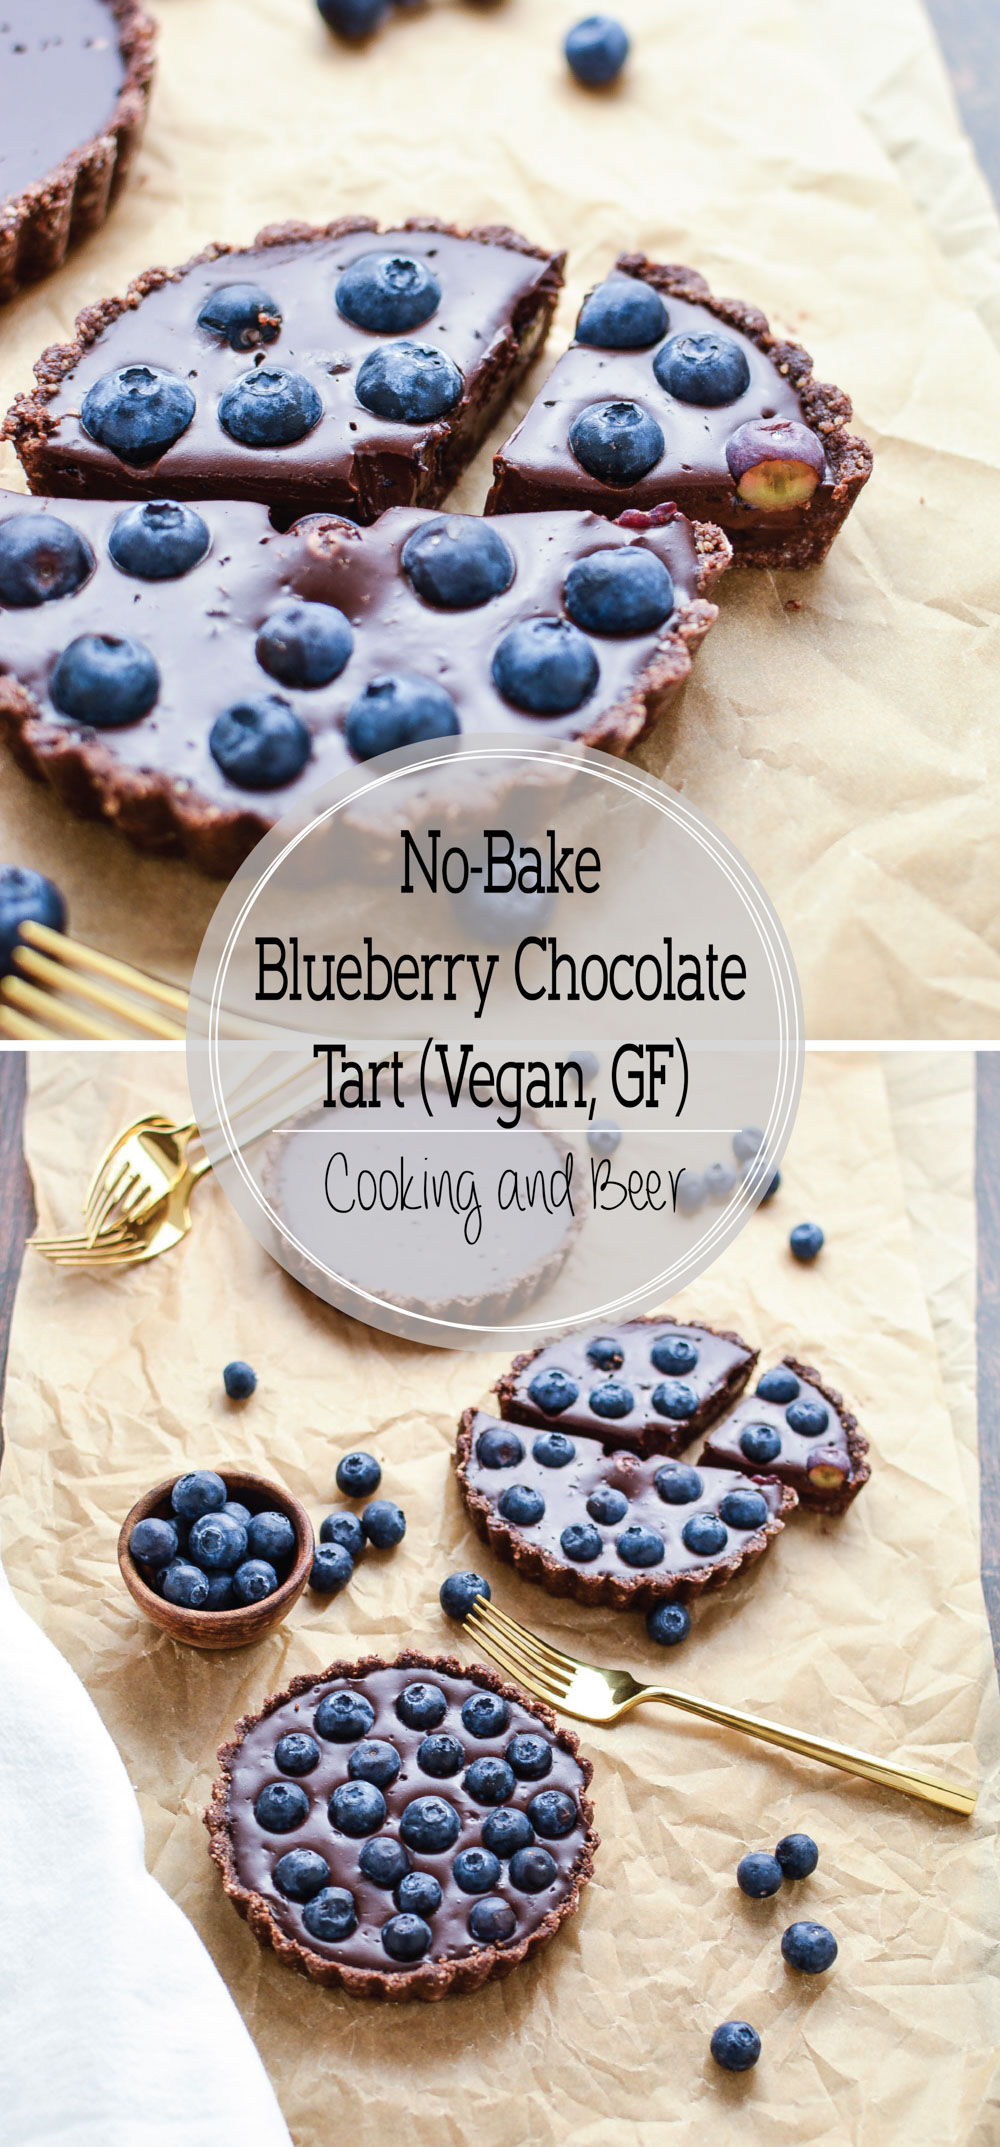 This no-bake blueberry chocolate tart is not only super simple and quick to make, but it is also vegan, gluten-free and paleo-friendly!